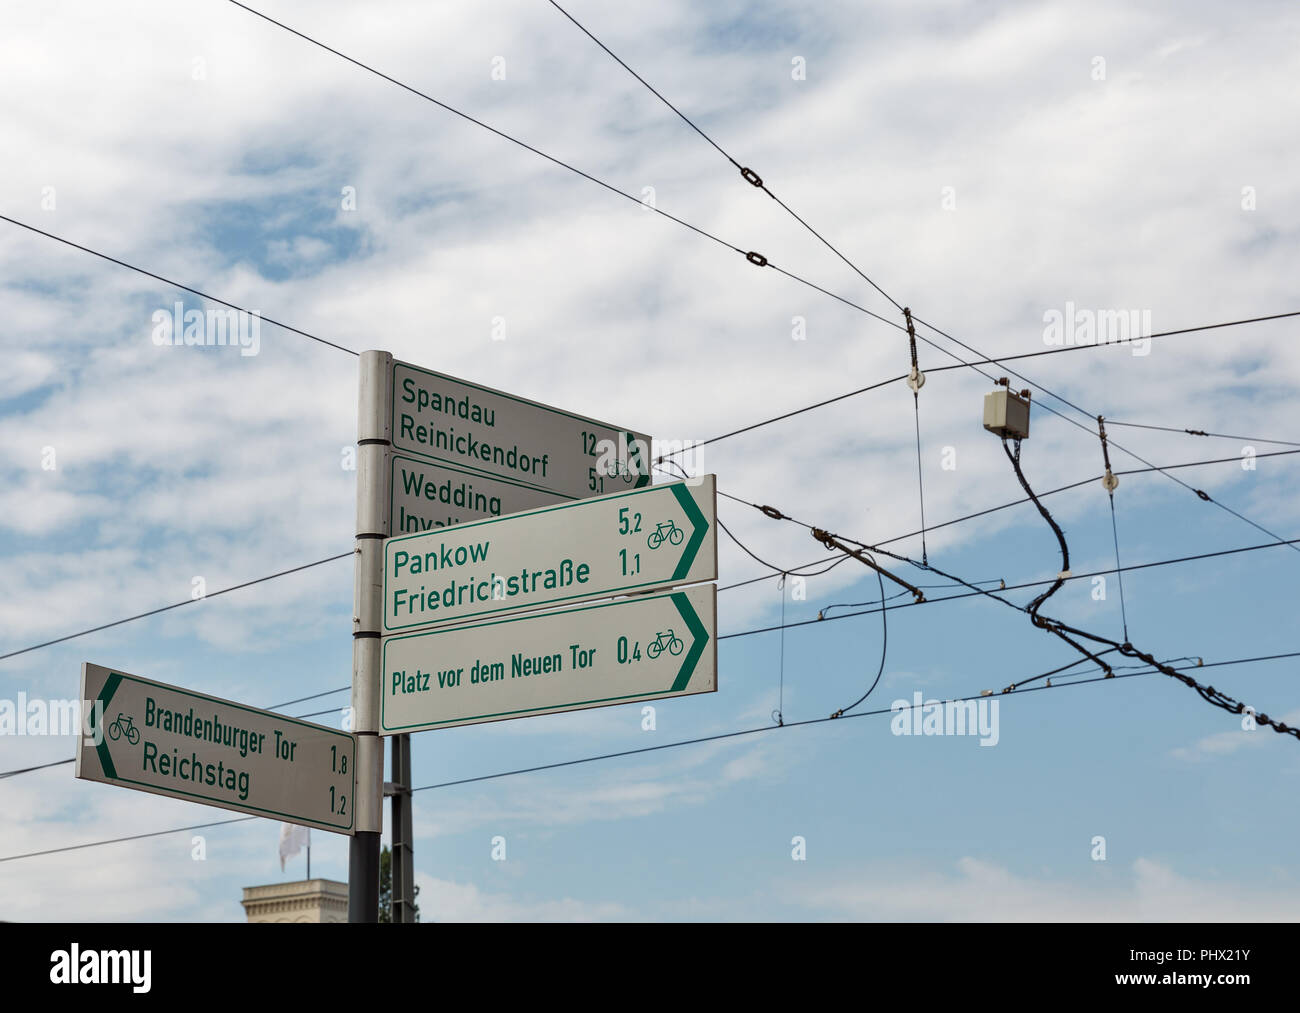 Street signpost against cloudy sky in Berlin, Germany. Stock Photo